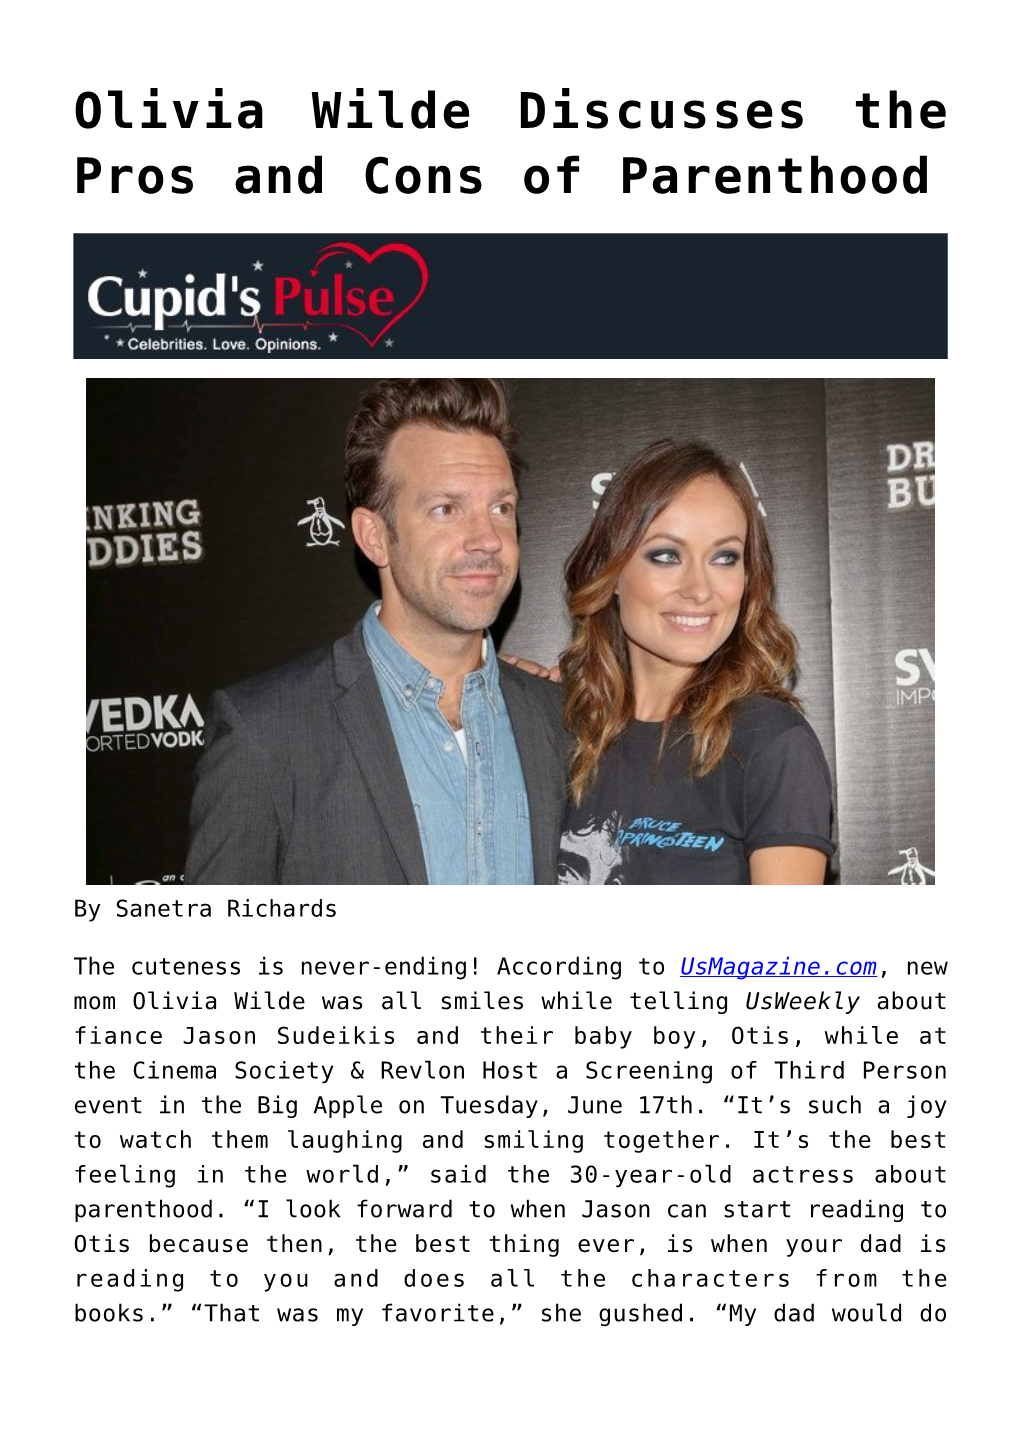 Olivia Wilde Discusses the Pros and Cons of Parenthood